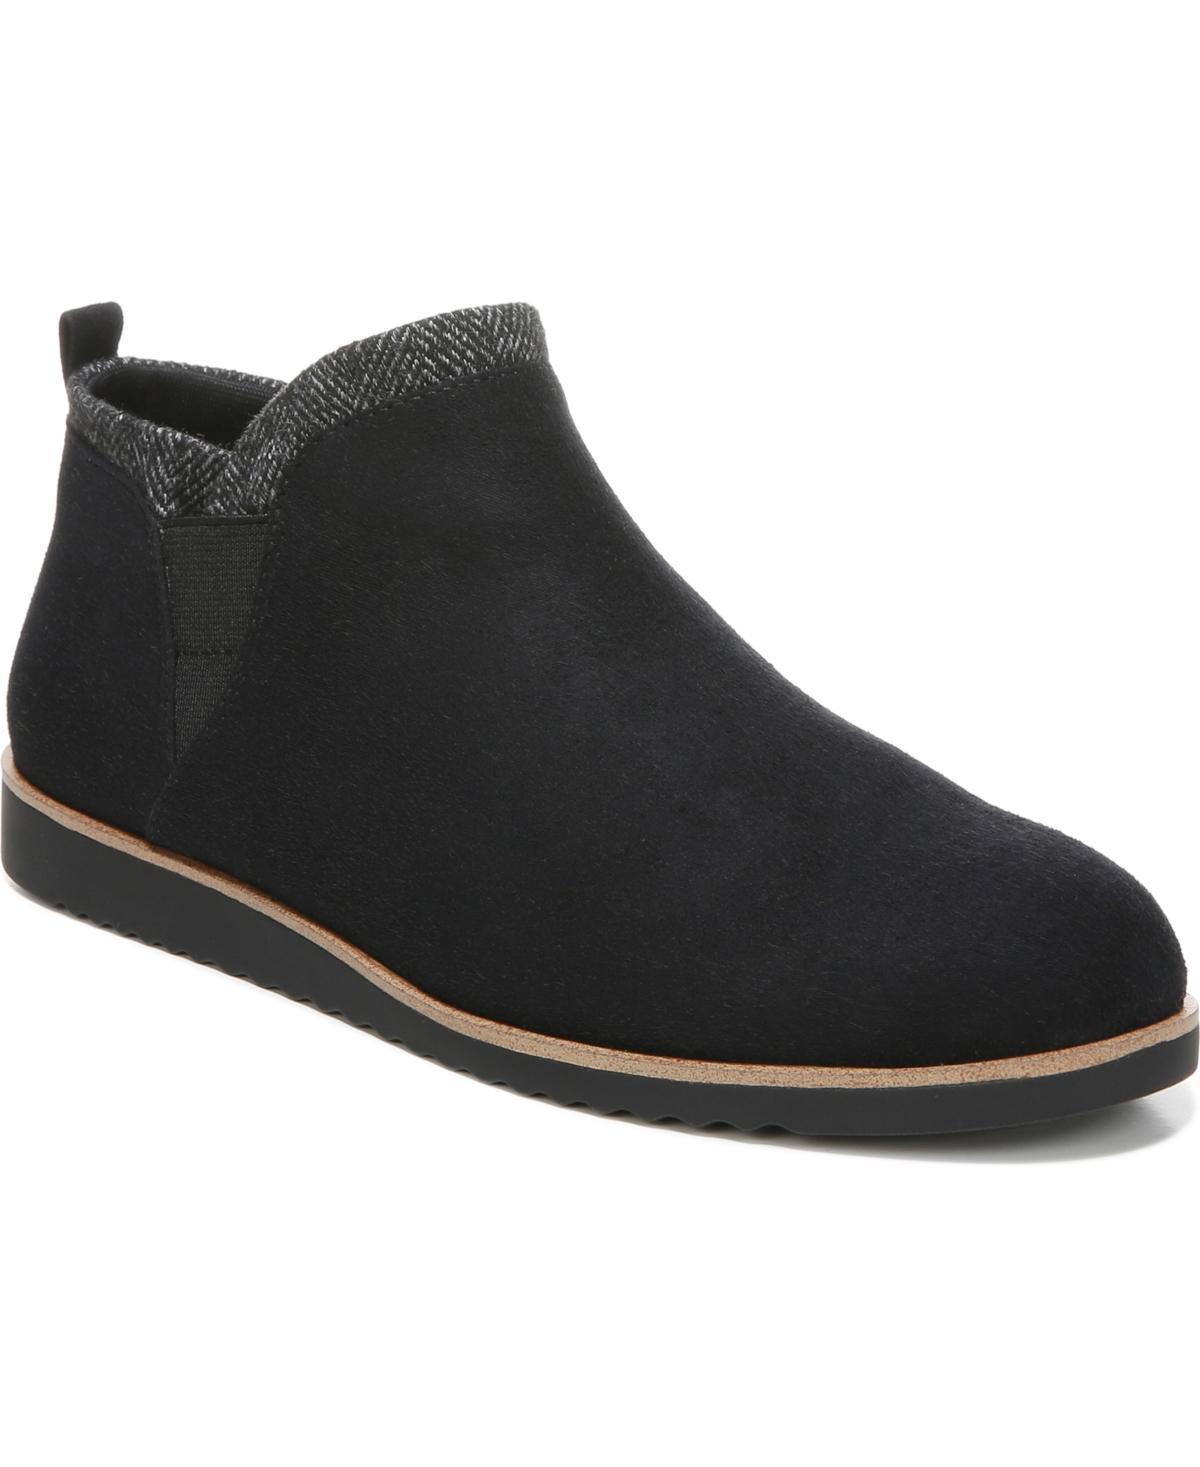 LifeStride Zion Womens Ankle Boots Black Product Image